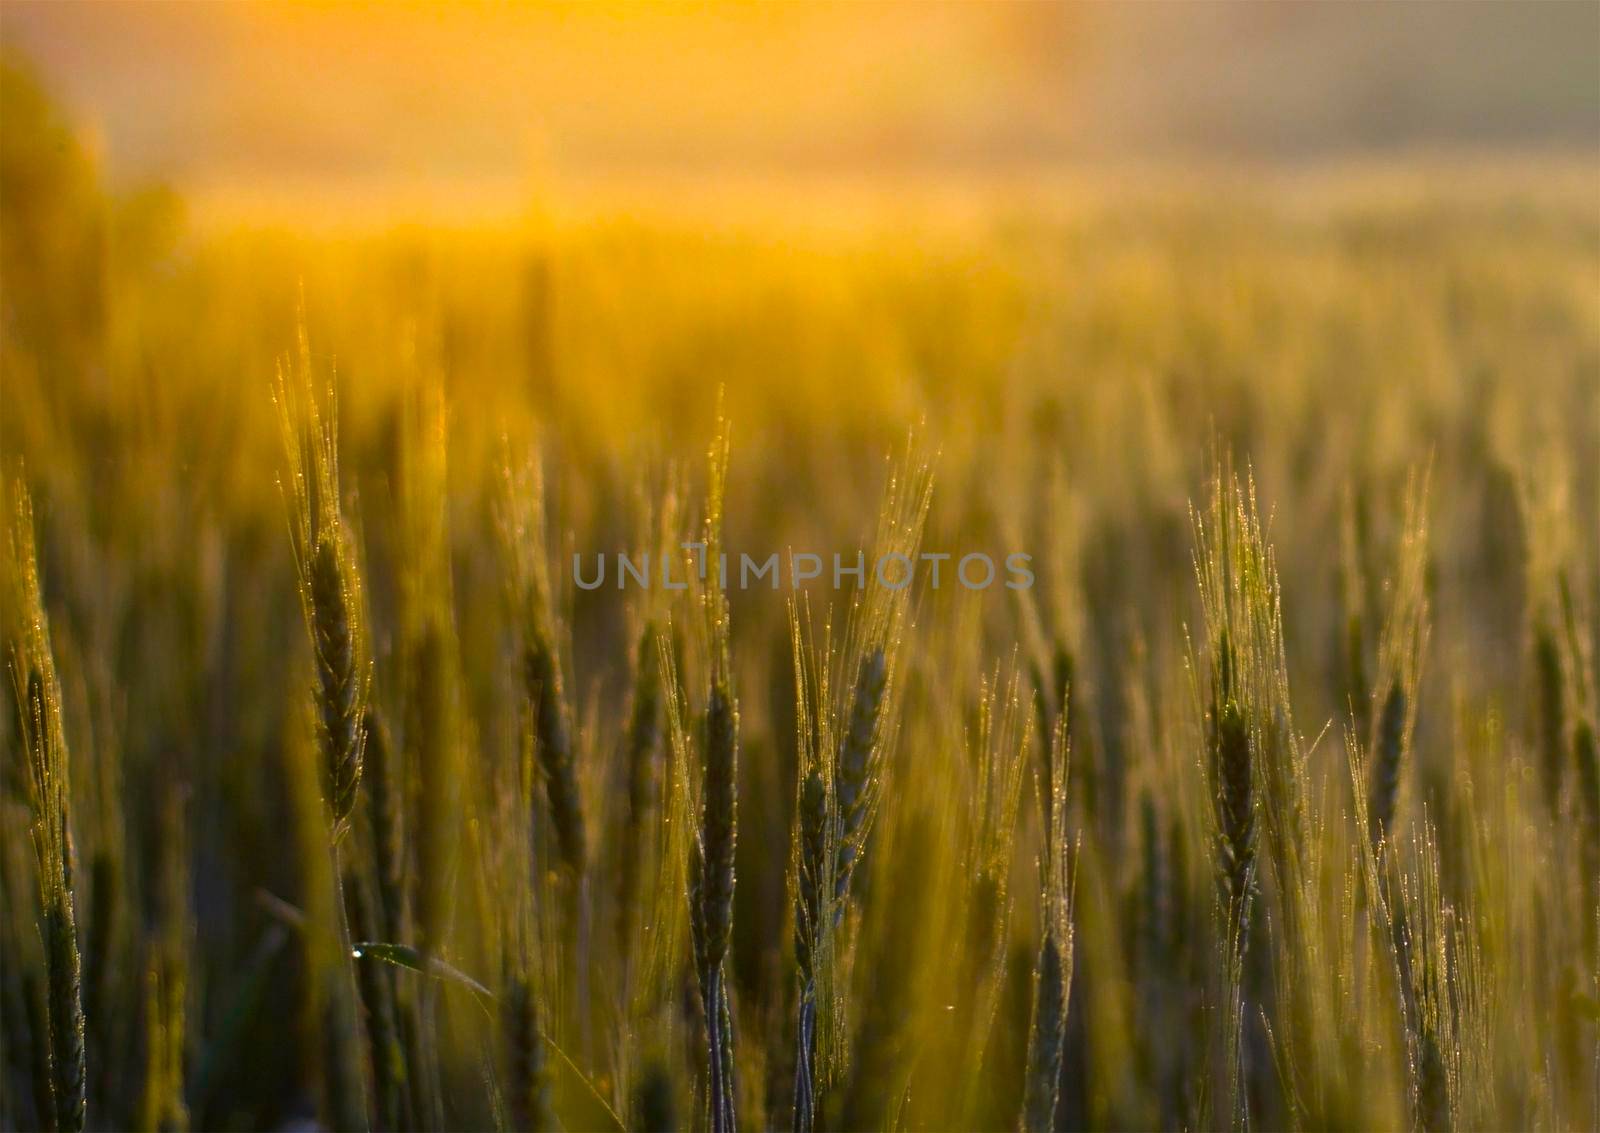 Abstract background with golden wheat ears in the sun